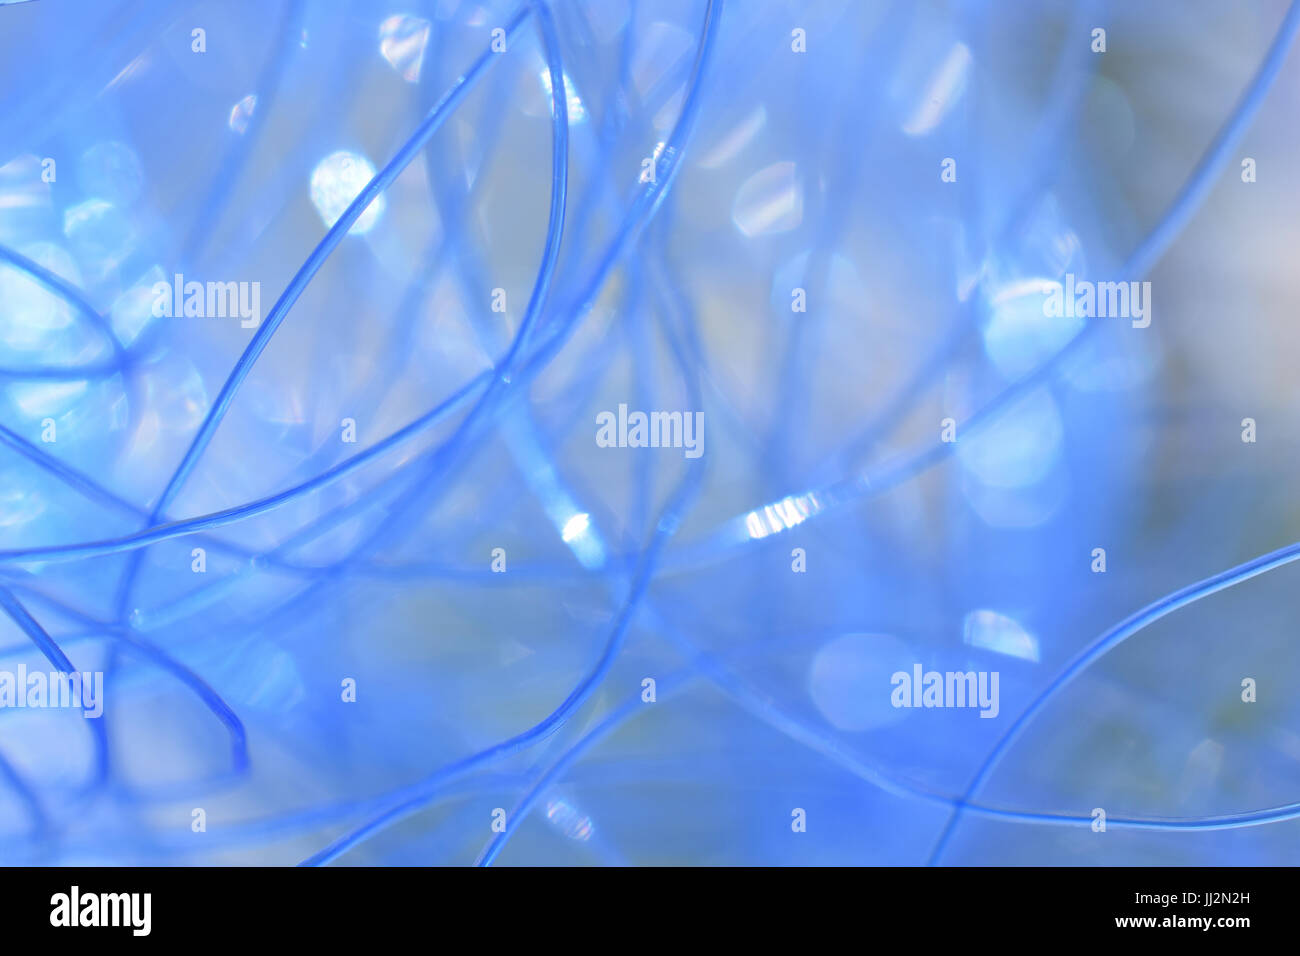 Blue abstract background. Round shapes. Stock Photo